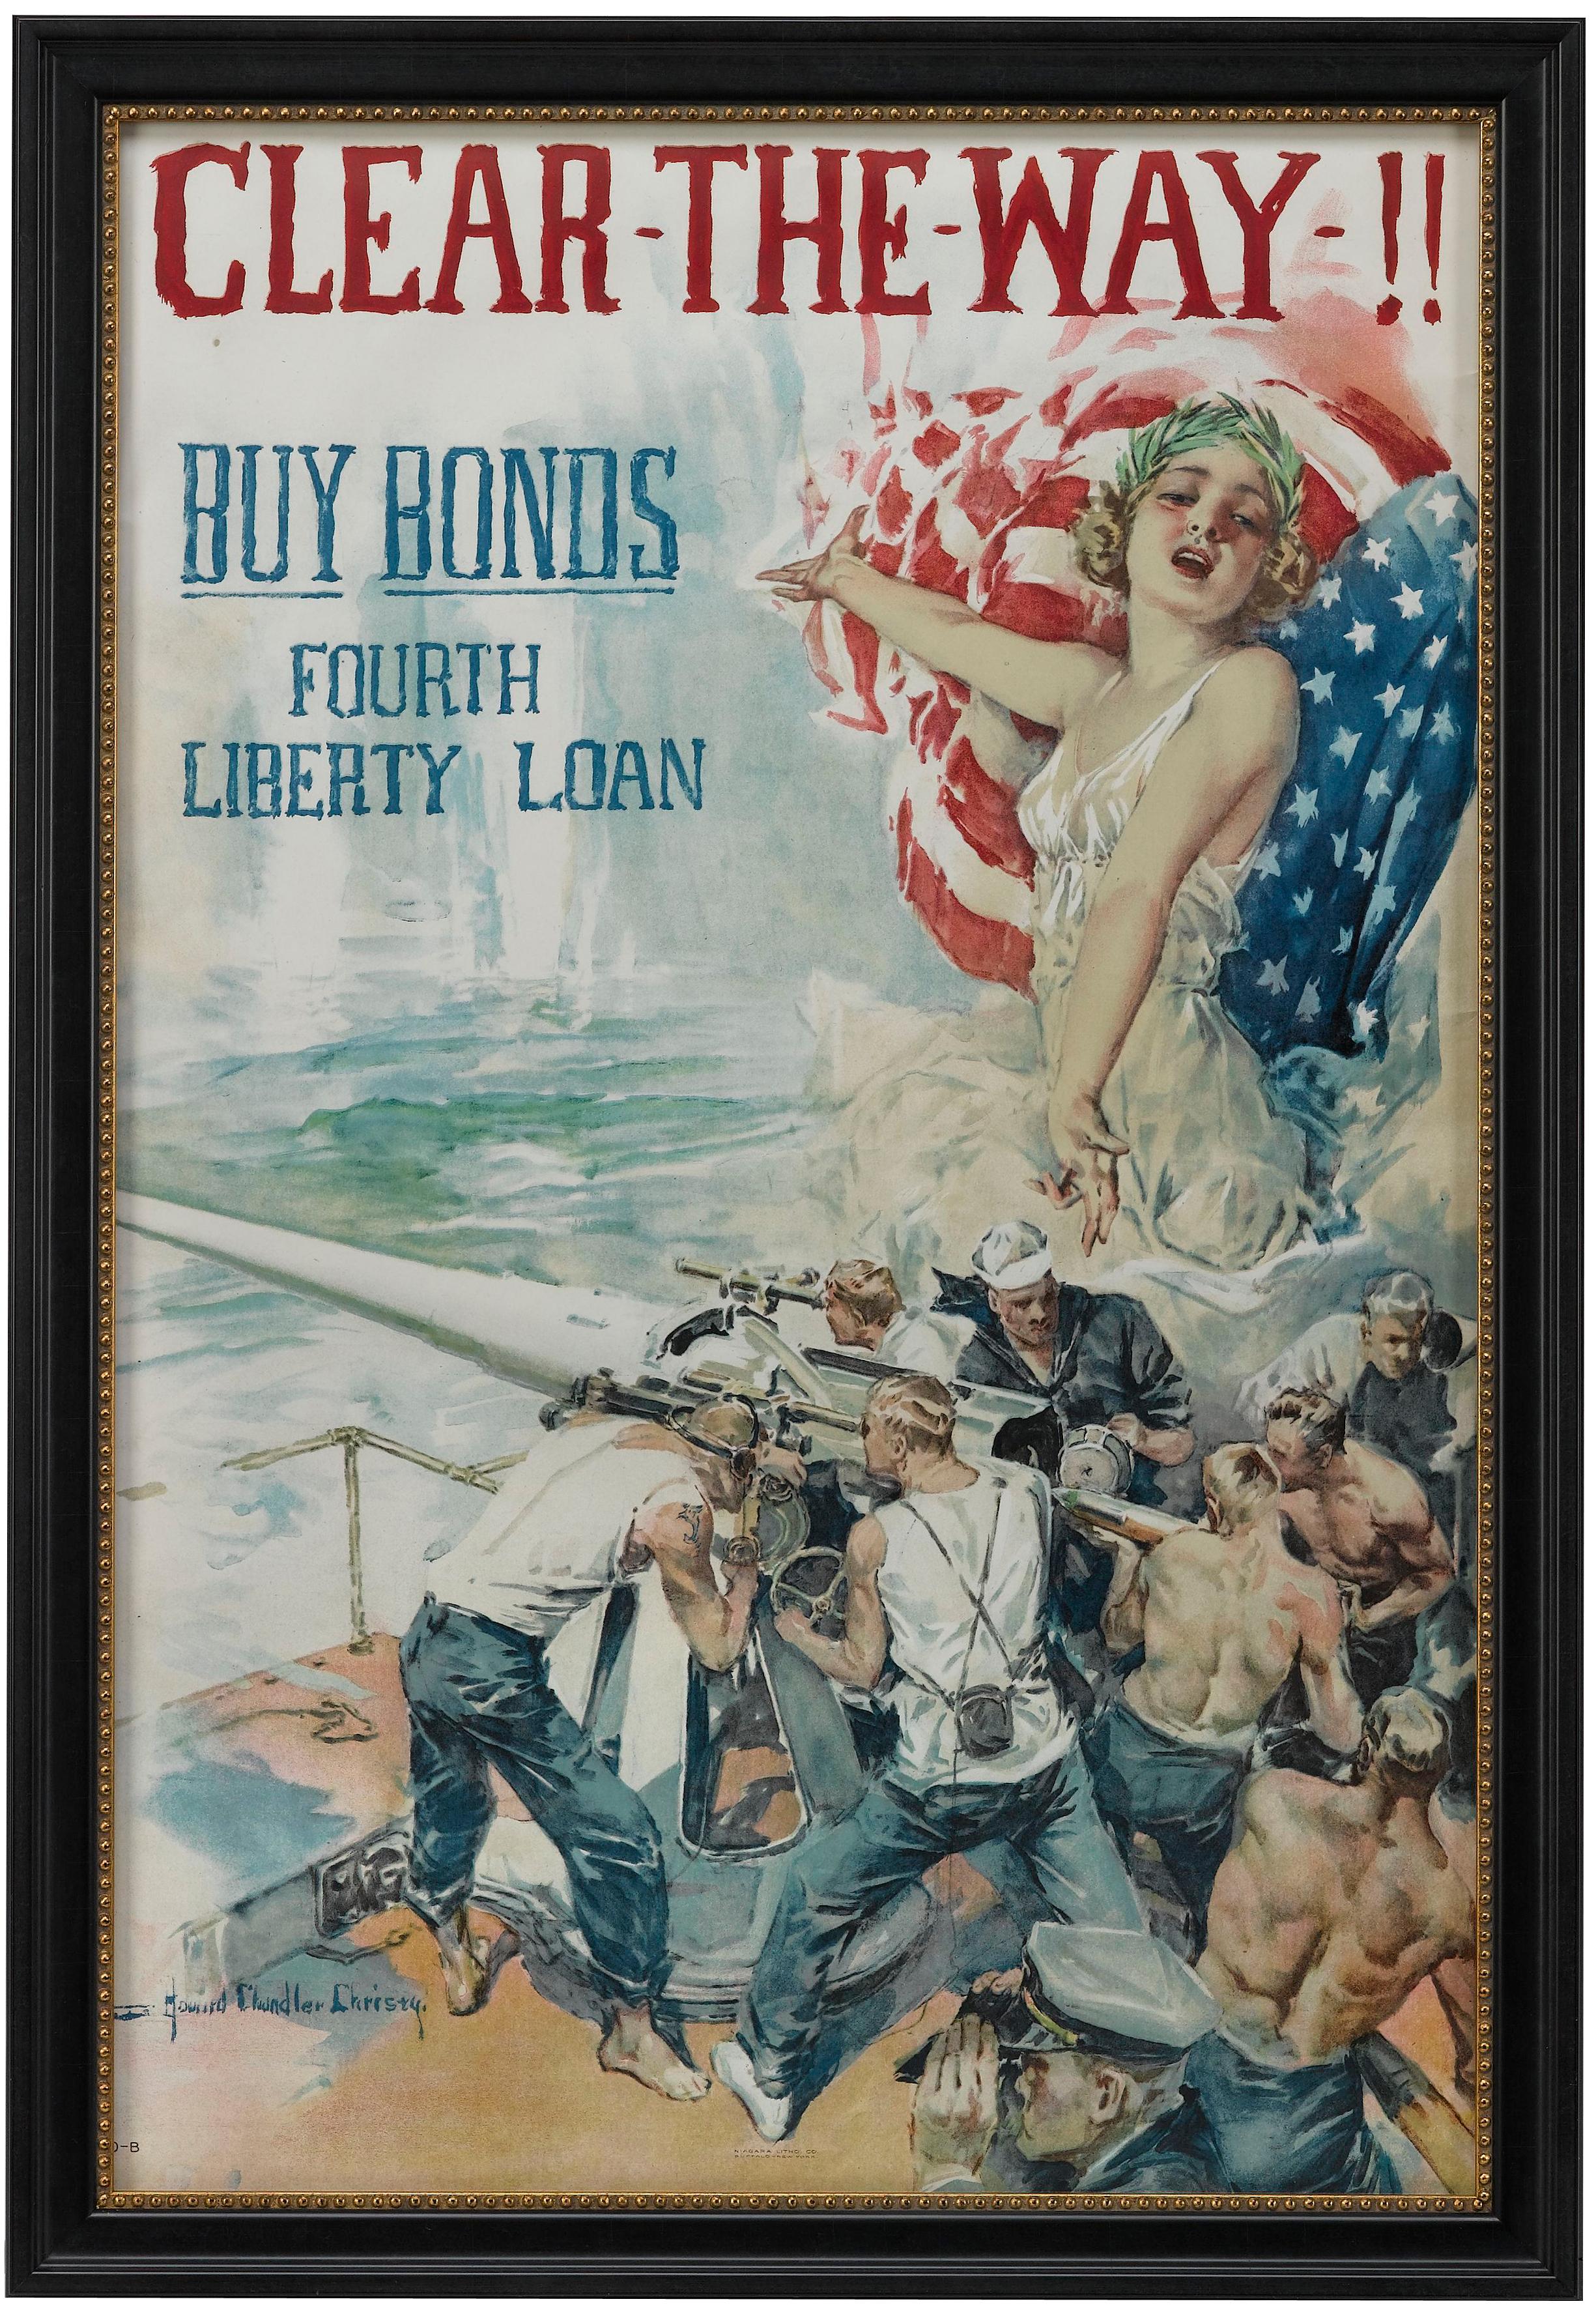 Presented is an original Howard Chandler Christy poster from 1919 entitled 